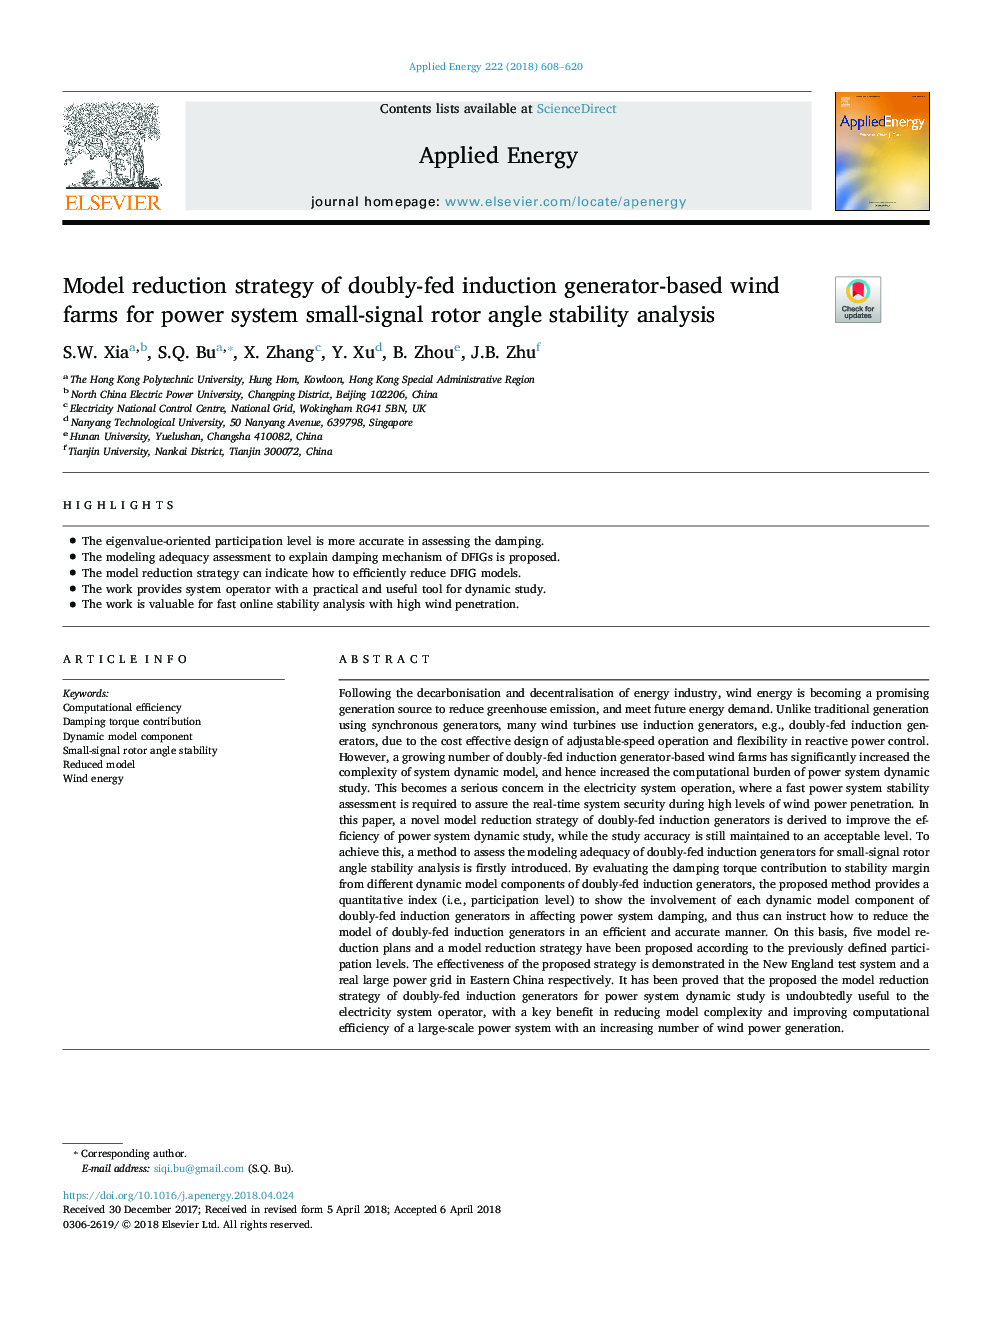 Model reduction strategy of doubly-fed induction generator-based wind farms for power system small-signal rotor angle stability analysis